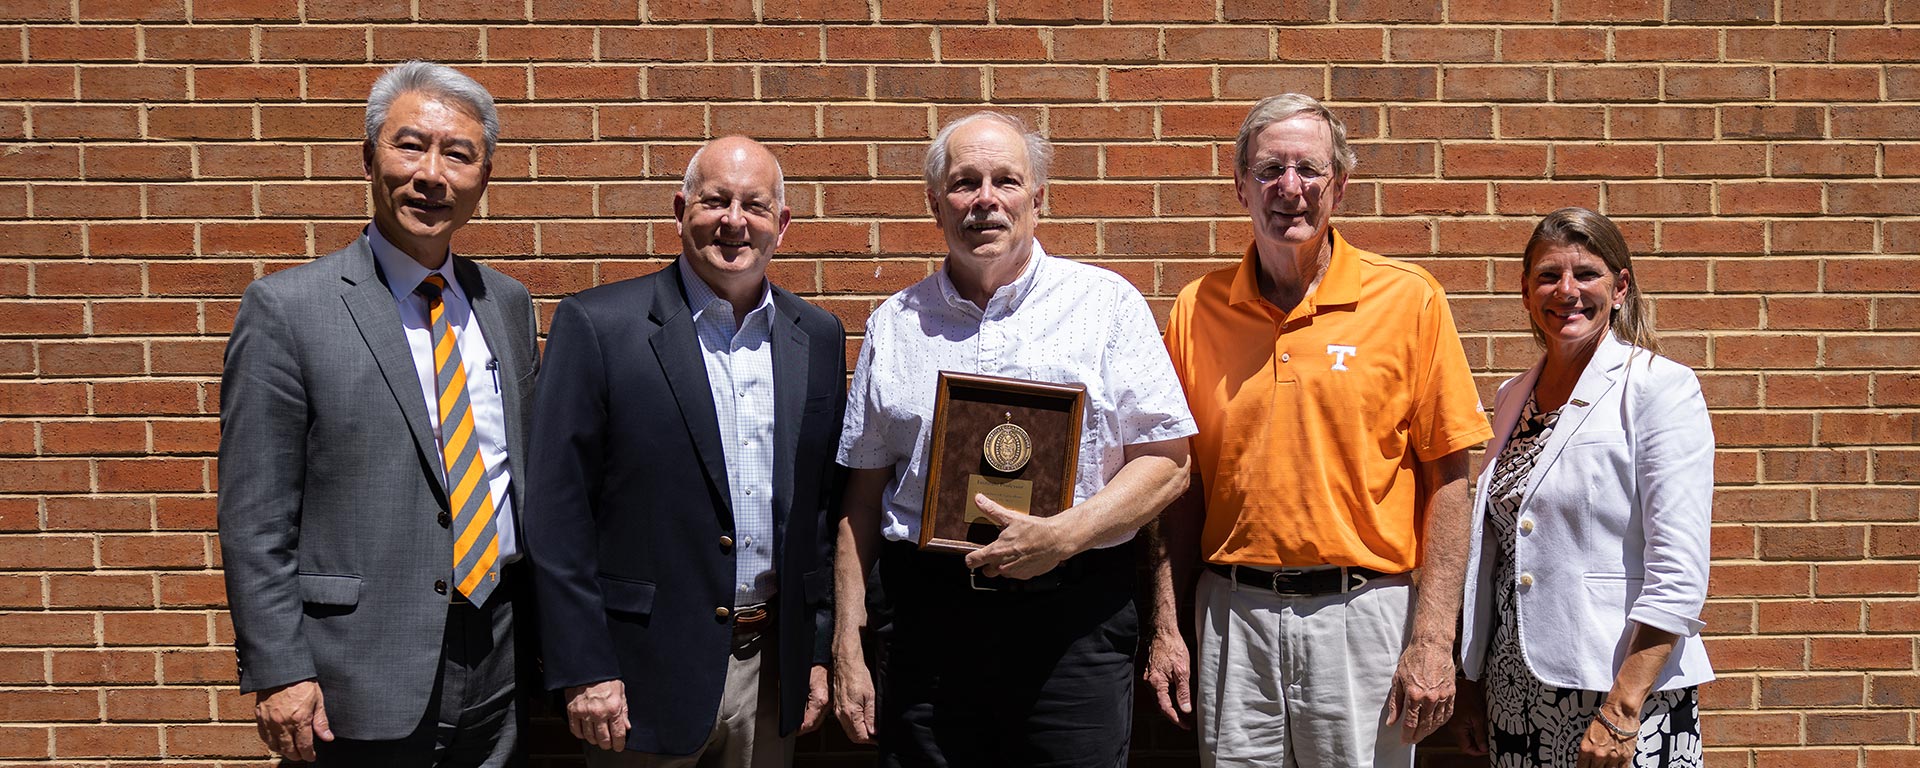 Ernest Bernard, center, a professor in the Department of Entomology and Plant Pathology, is the recipient of the UTIA Institute Professor Award, the Institute’s top recognition for faculty. With him are, from left, AgResearch Dean Hongwei Xin; UTIA Senior Vice Chancellor and Senior Vice President Keith Carver; College of Veterinary Medicine Dean Jim Thompson; and UT Extension Dean Ashley Stokes.